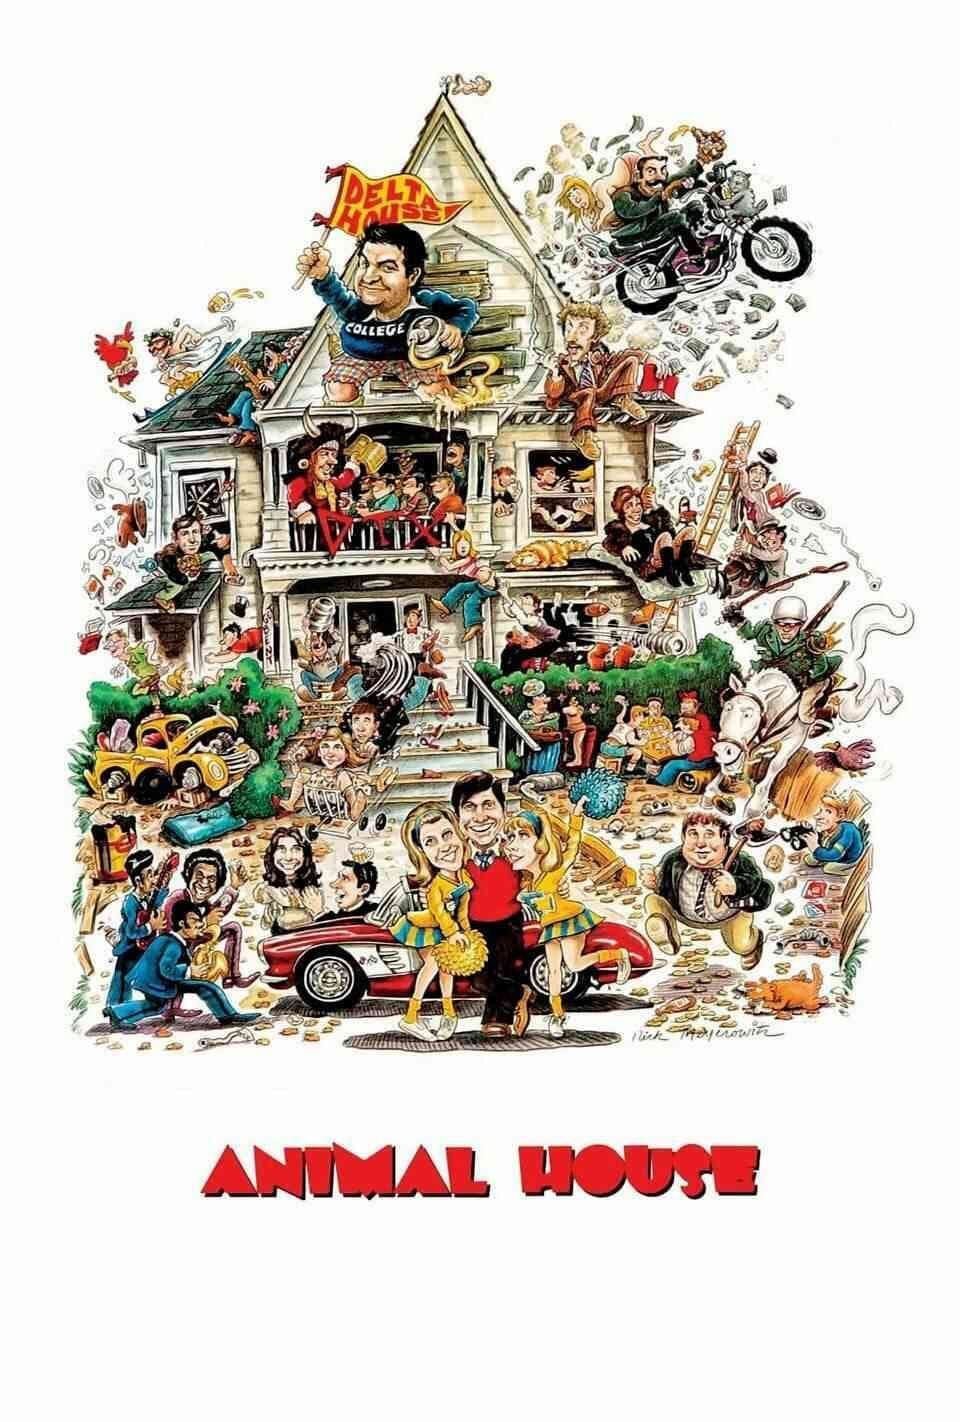 Read National Lampoon's Animal House screenplay (poster)